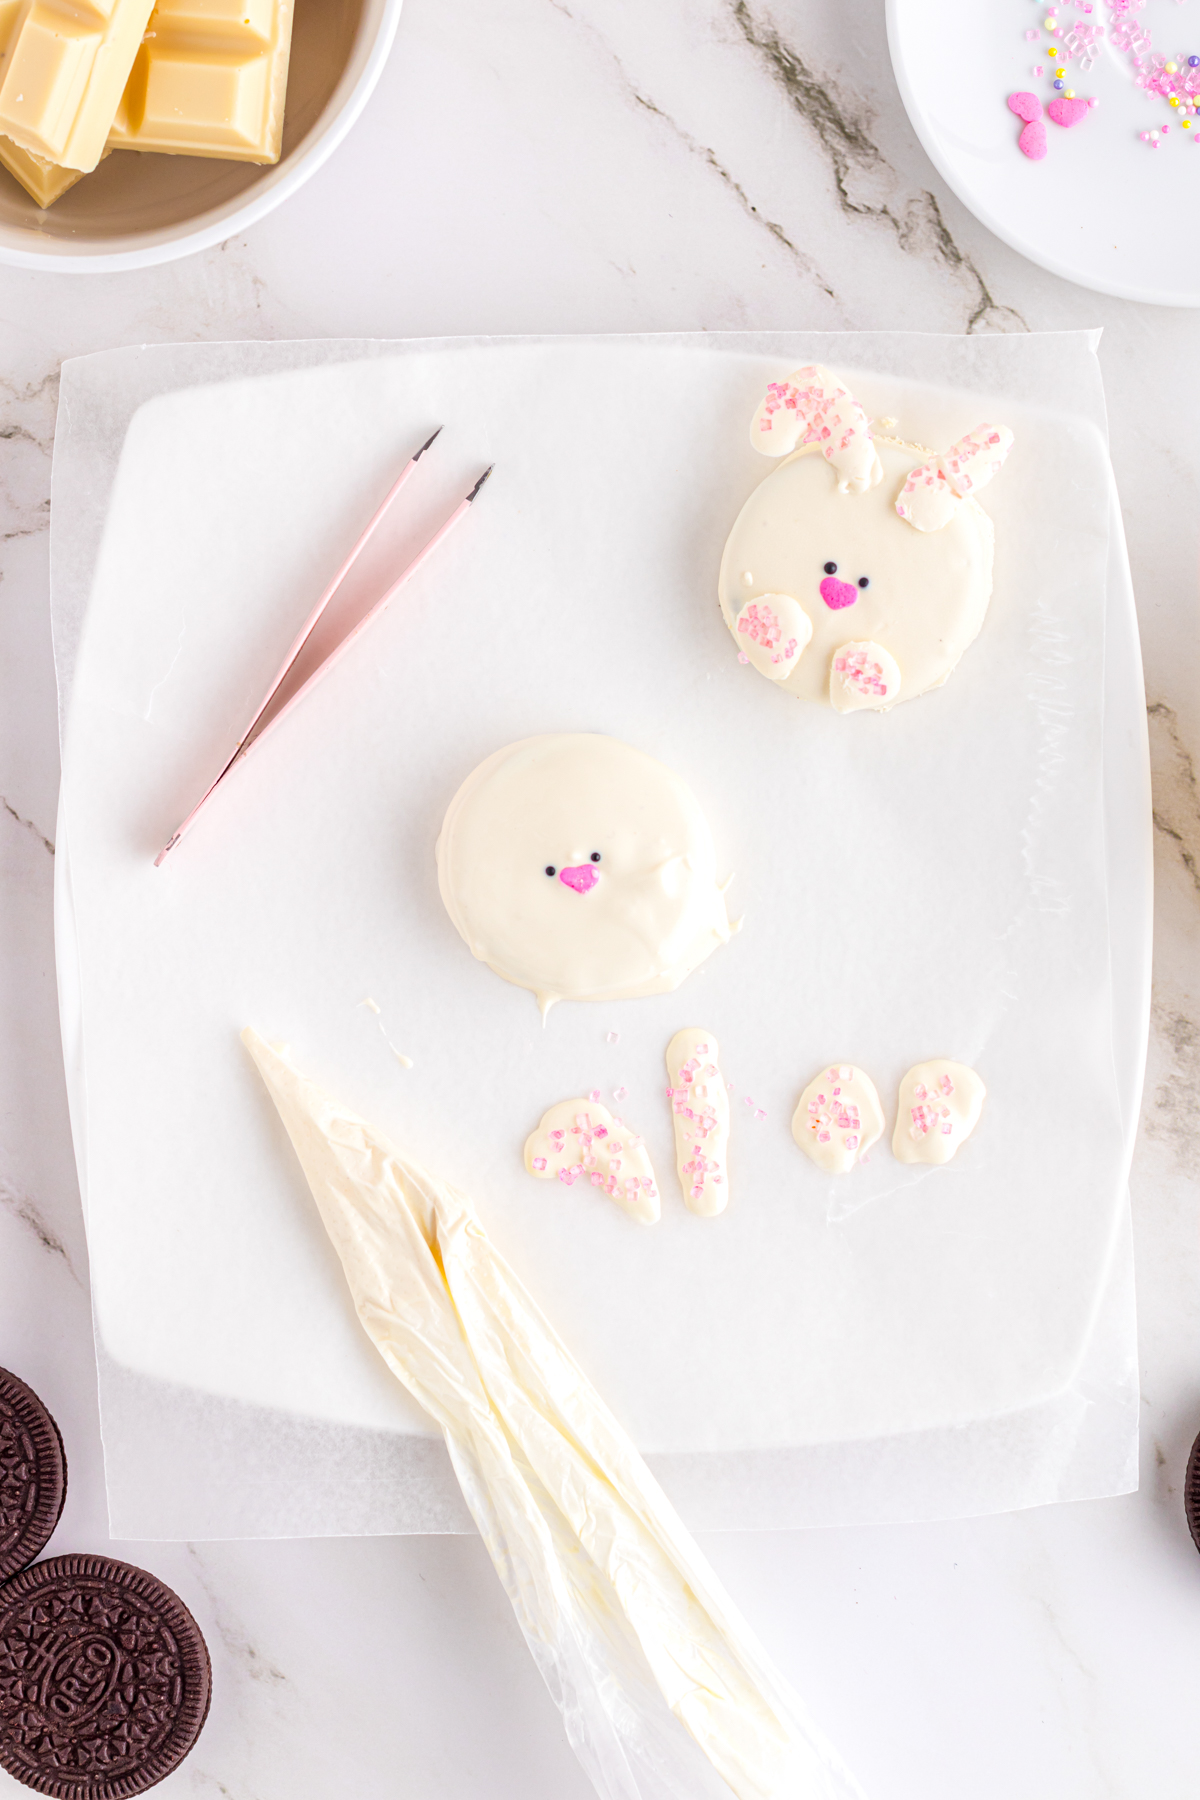 piping bag and Easter Oreos that look like bunnies on a white plate